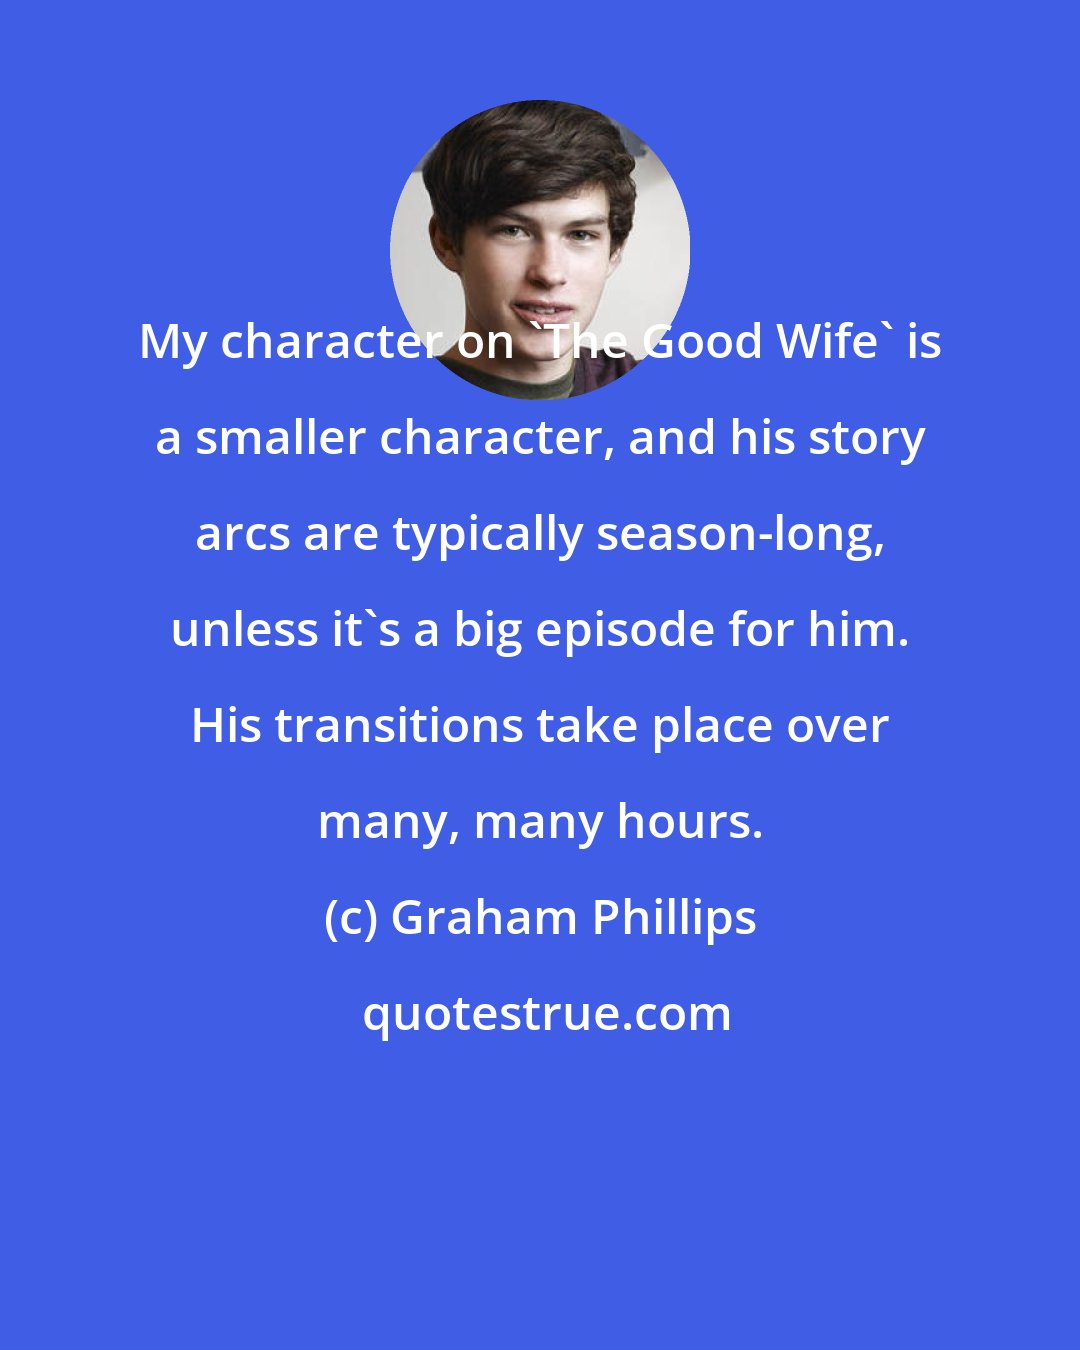 Graham Phillips: My character on 'The Good Wife' is a smaller character, and his story arcs are typically season-long, unless it's a big episode for him. His transitions take place over many, many hours.